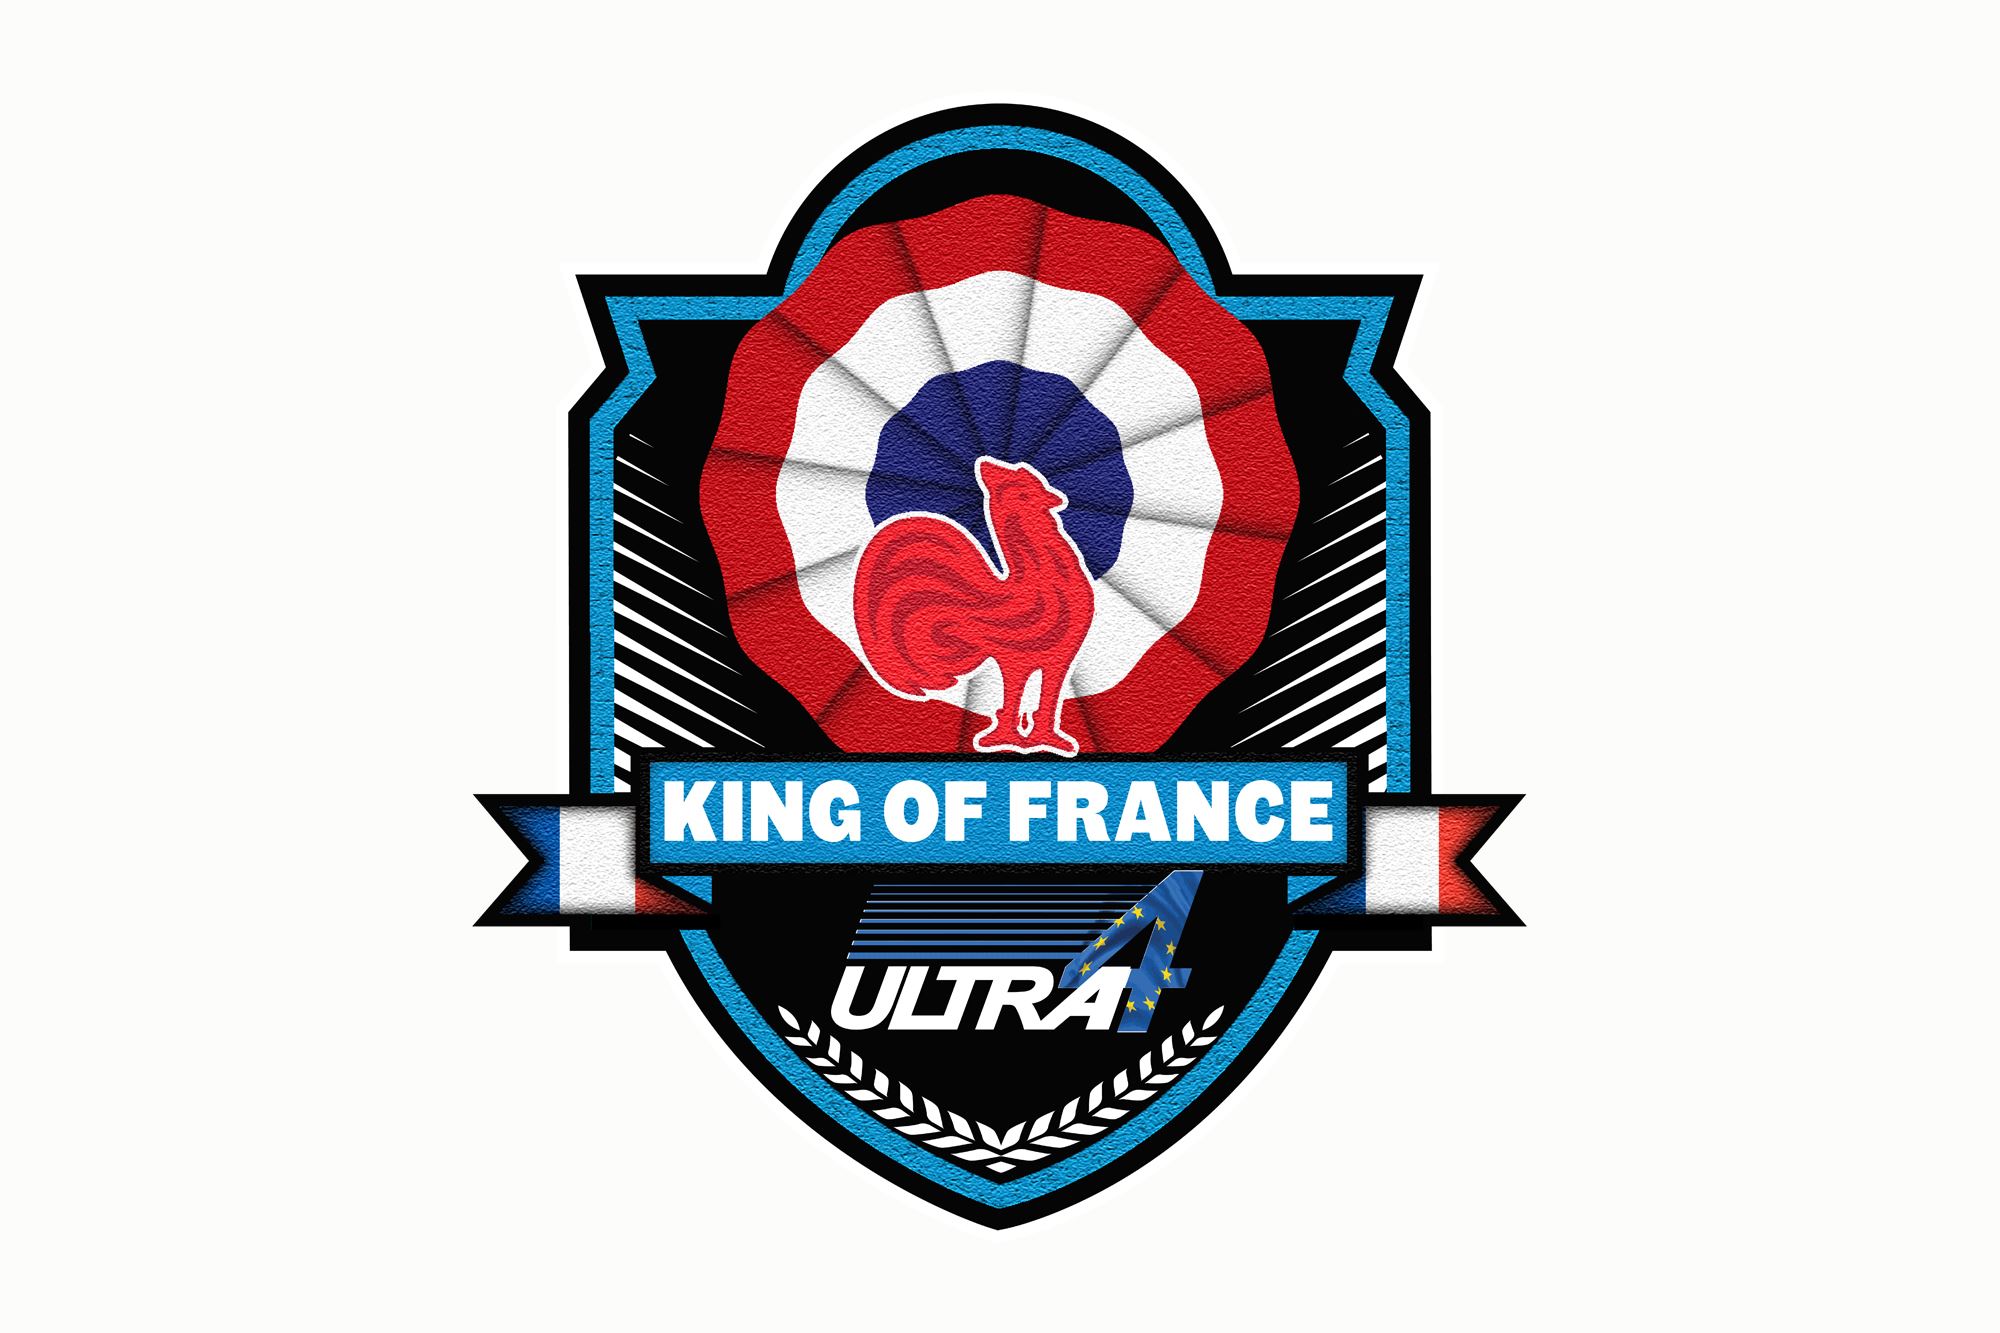 King of France and Ultra4 Europe 2022 championship